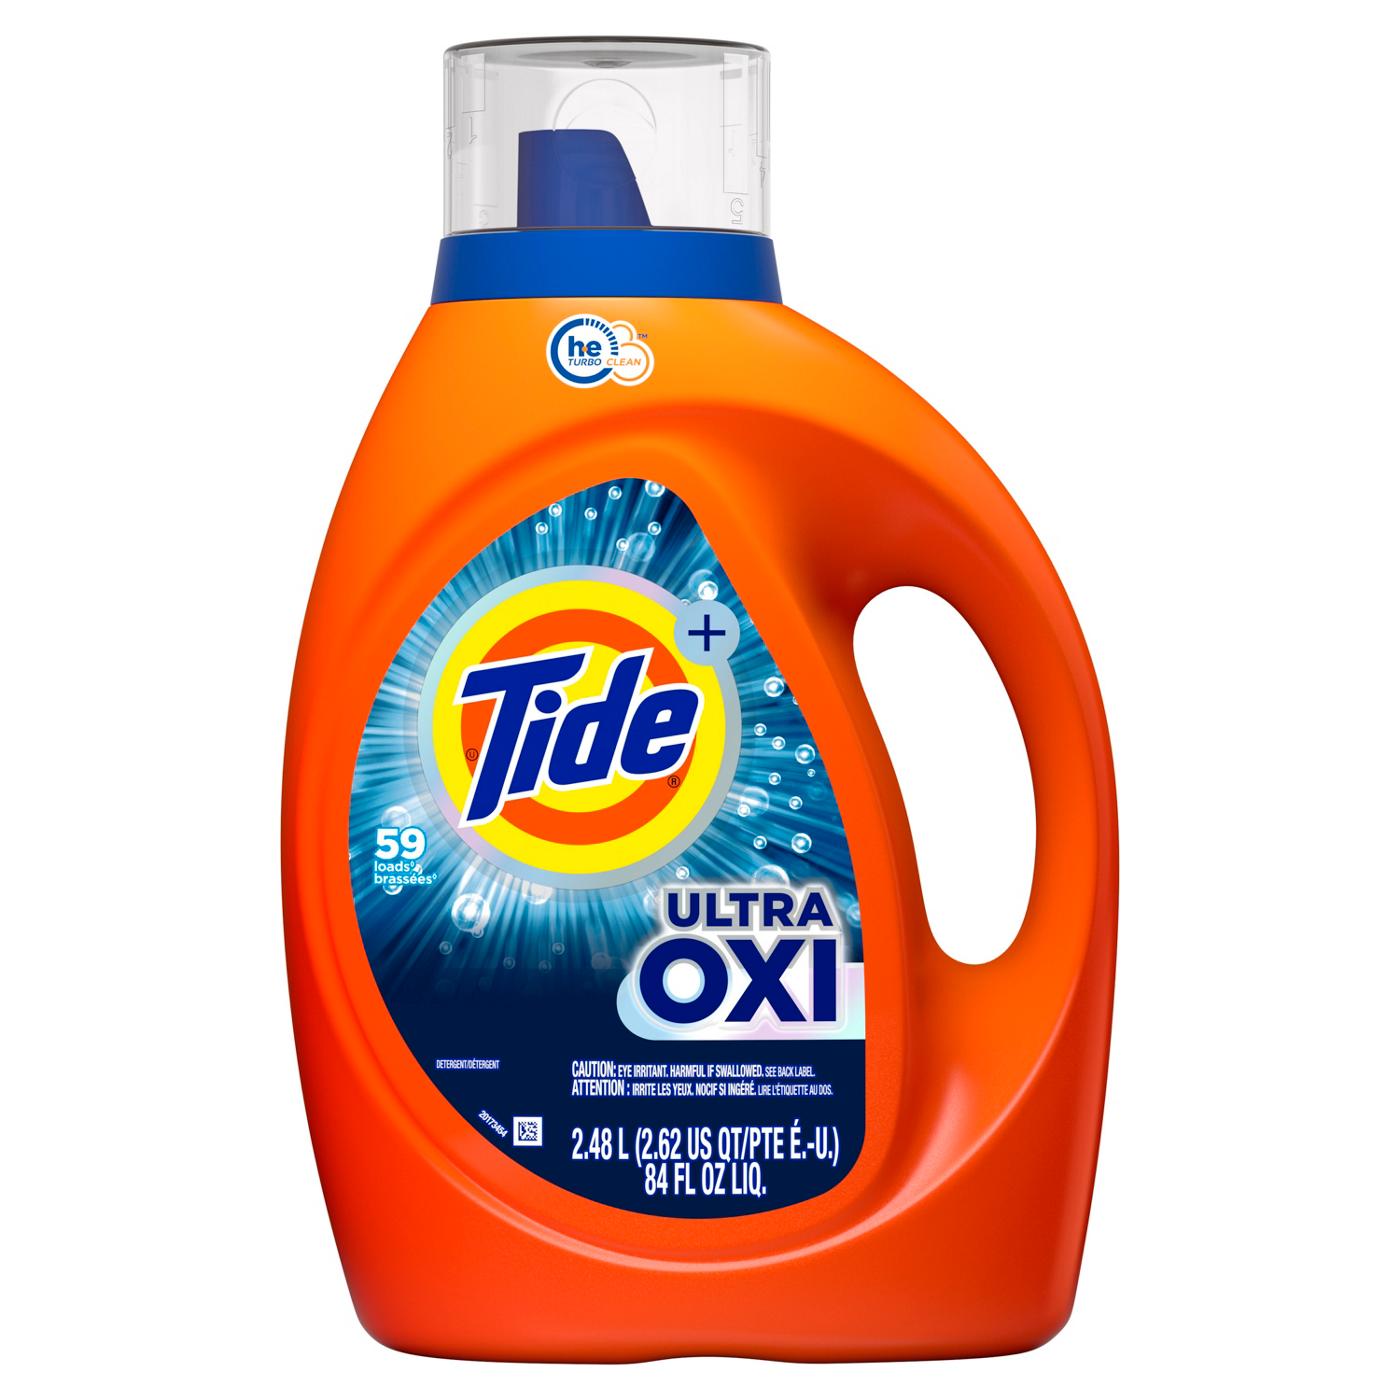 Tide + Ultra OXI HE Turbo Clean Liquid Laundry Detergent, 59 Loads; image 1 of 9